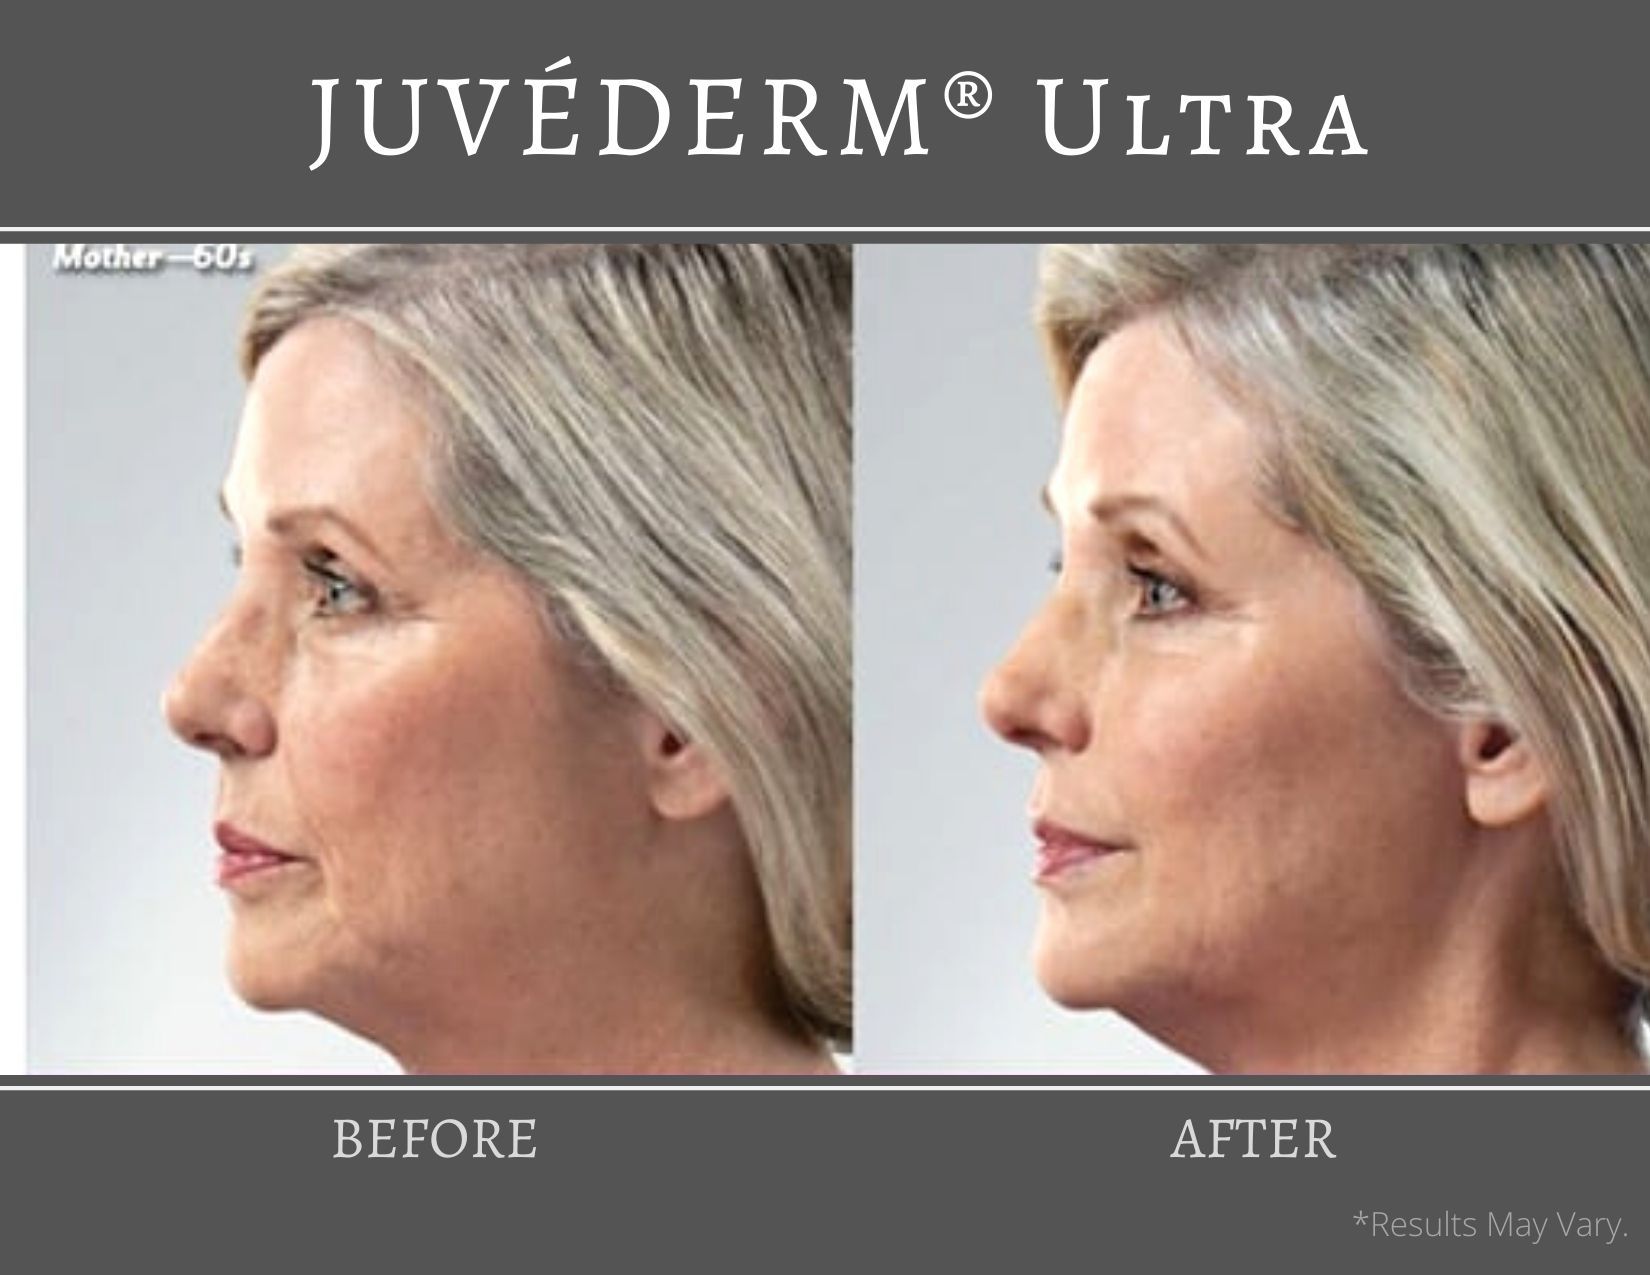 A mother in her 60s and the visible effects before and after receiving JUVEDERM Ultra treatments.